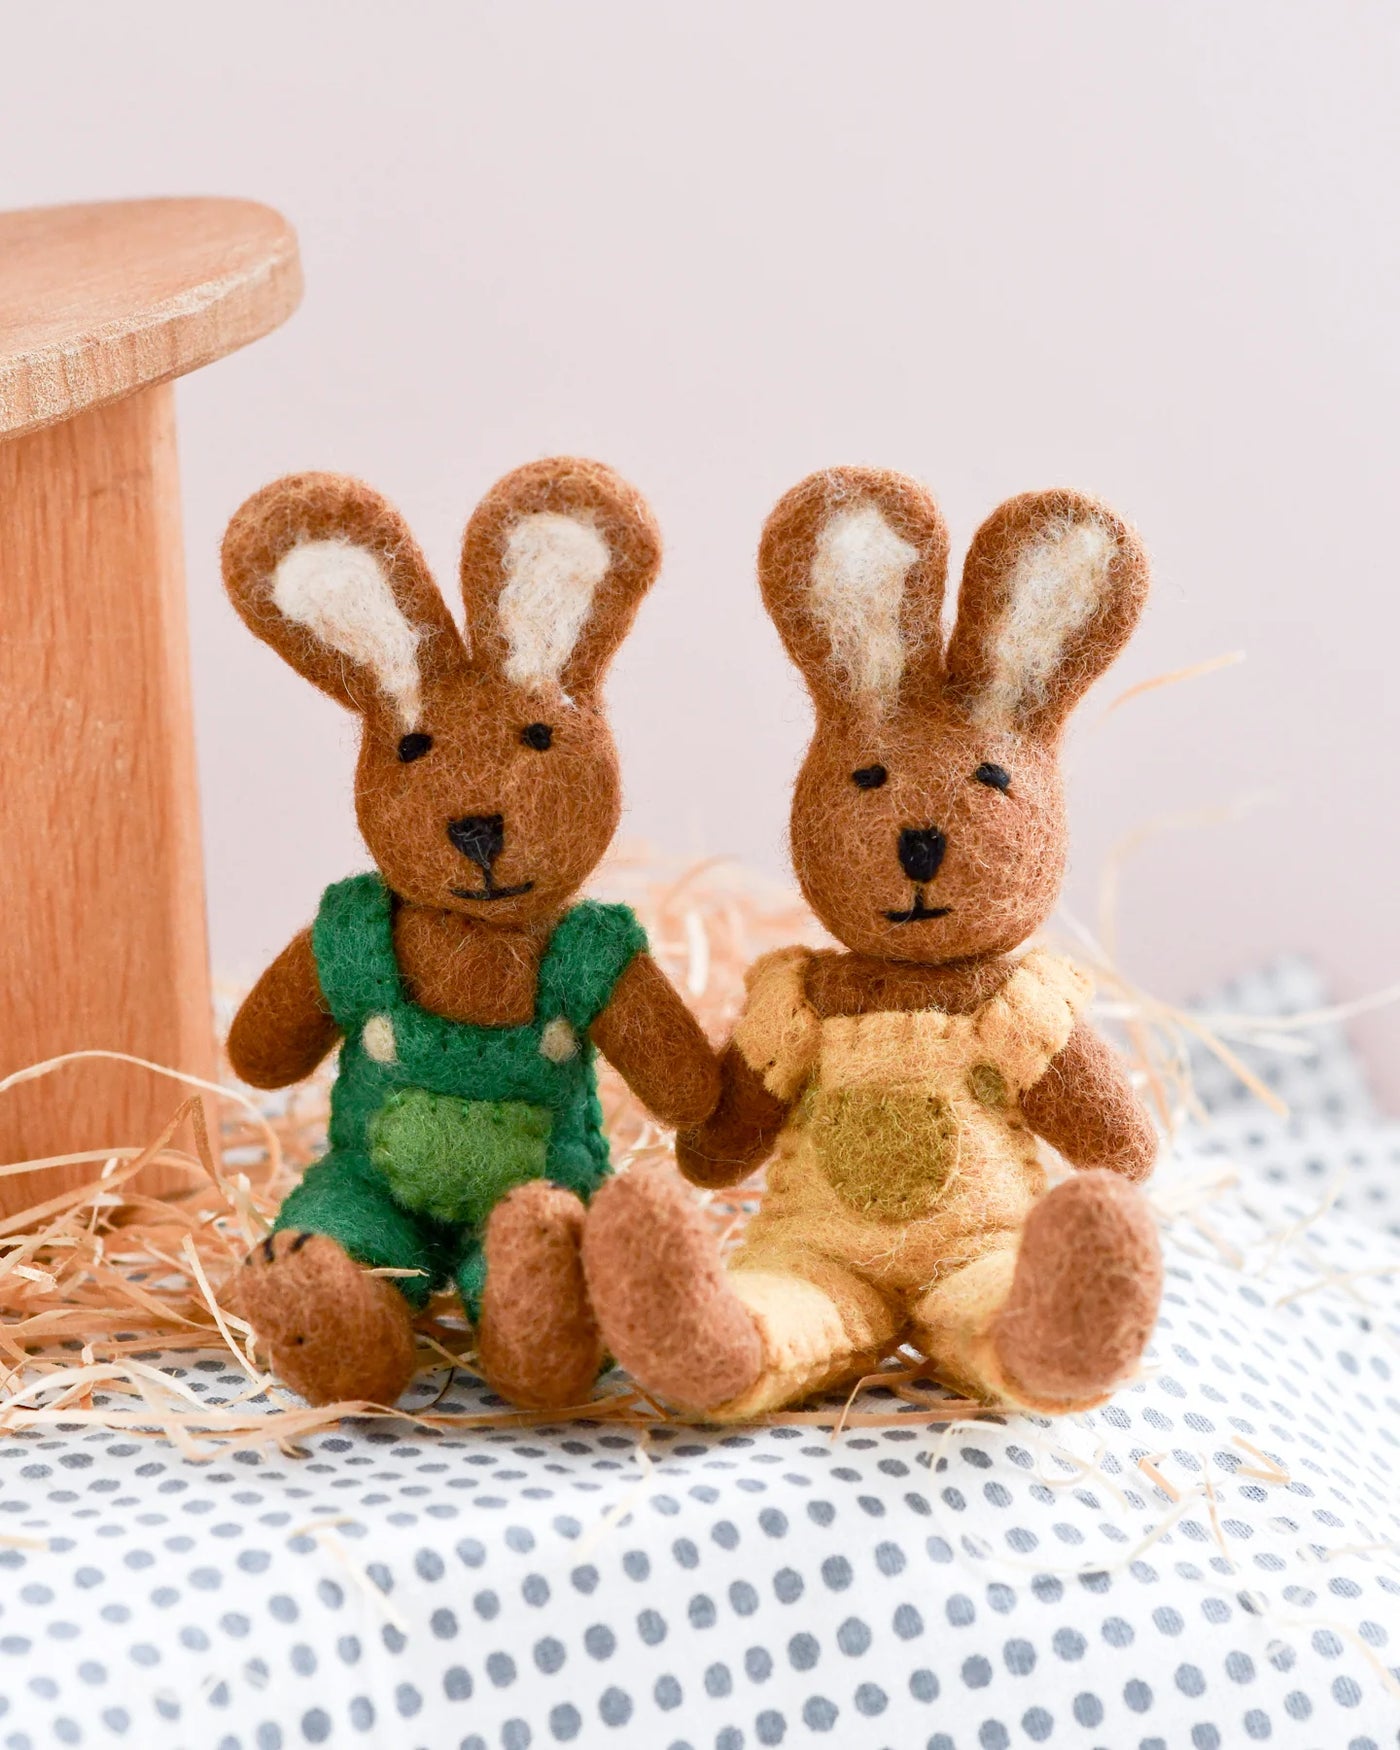 Felt Brown Hare Rabbit with Green Overalls Toy